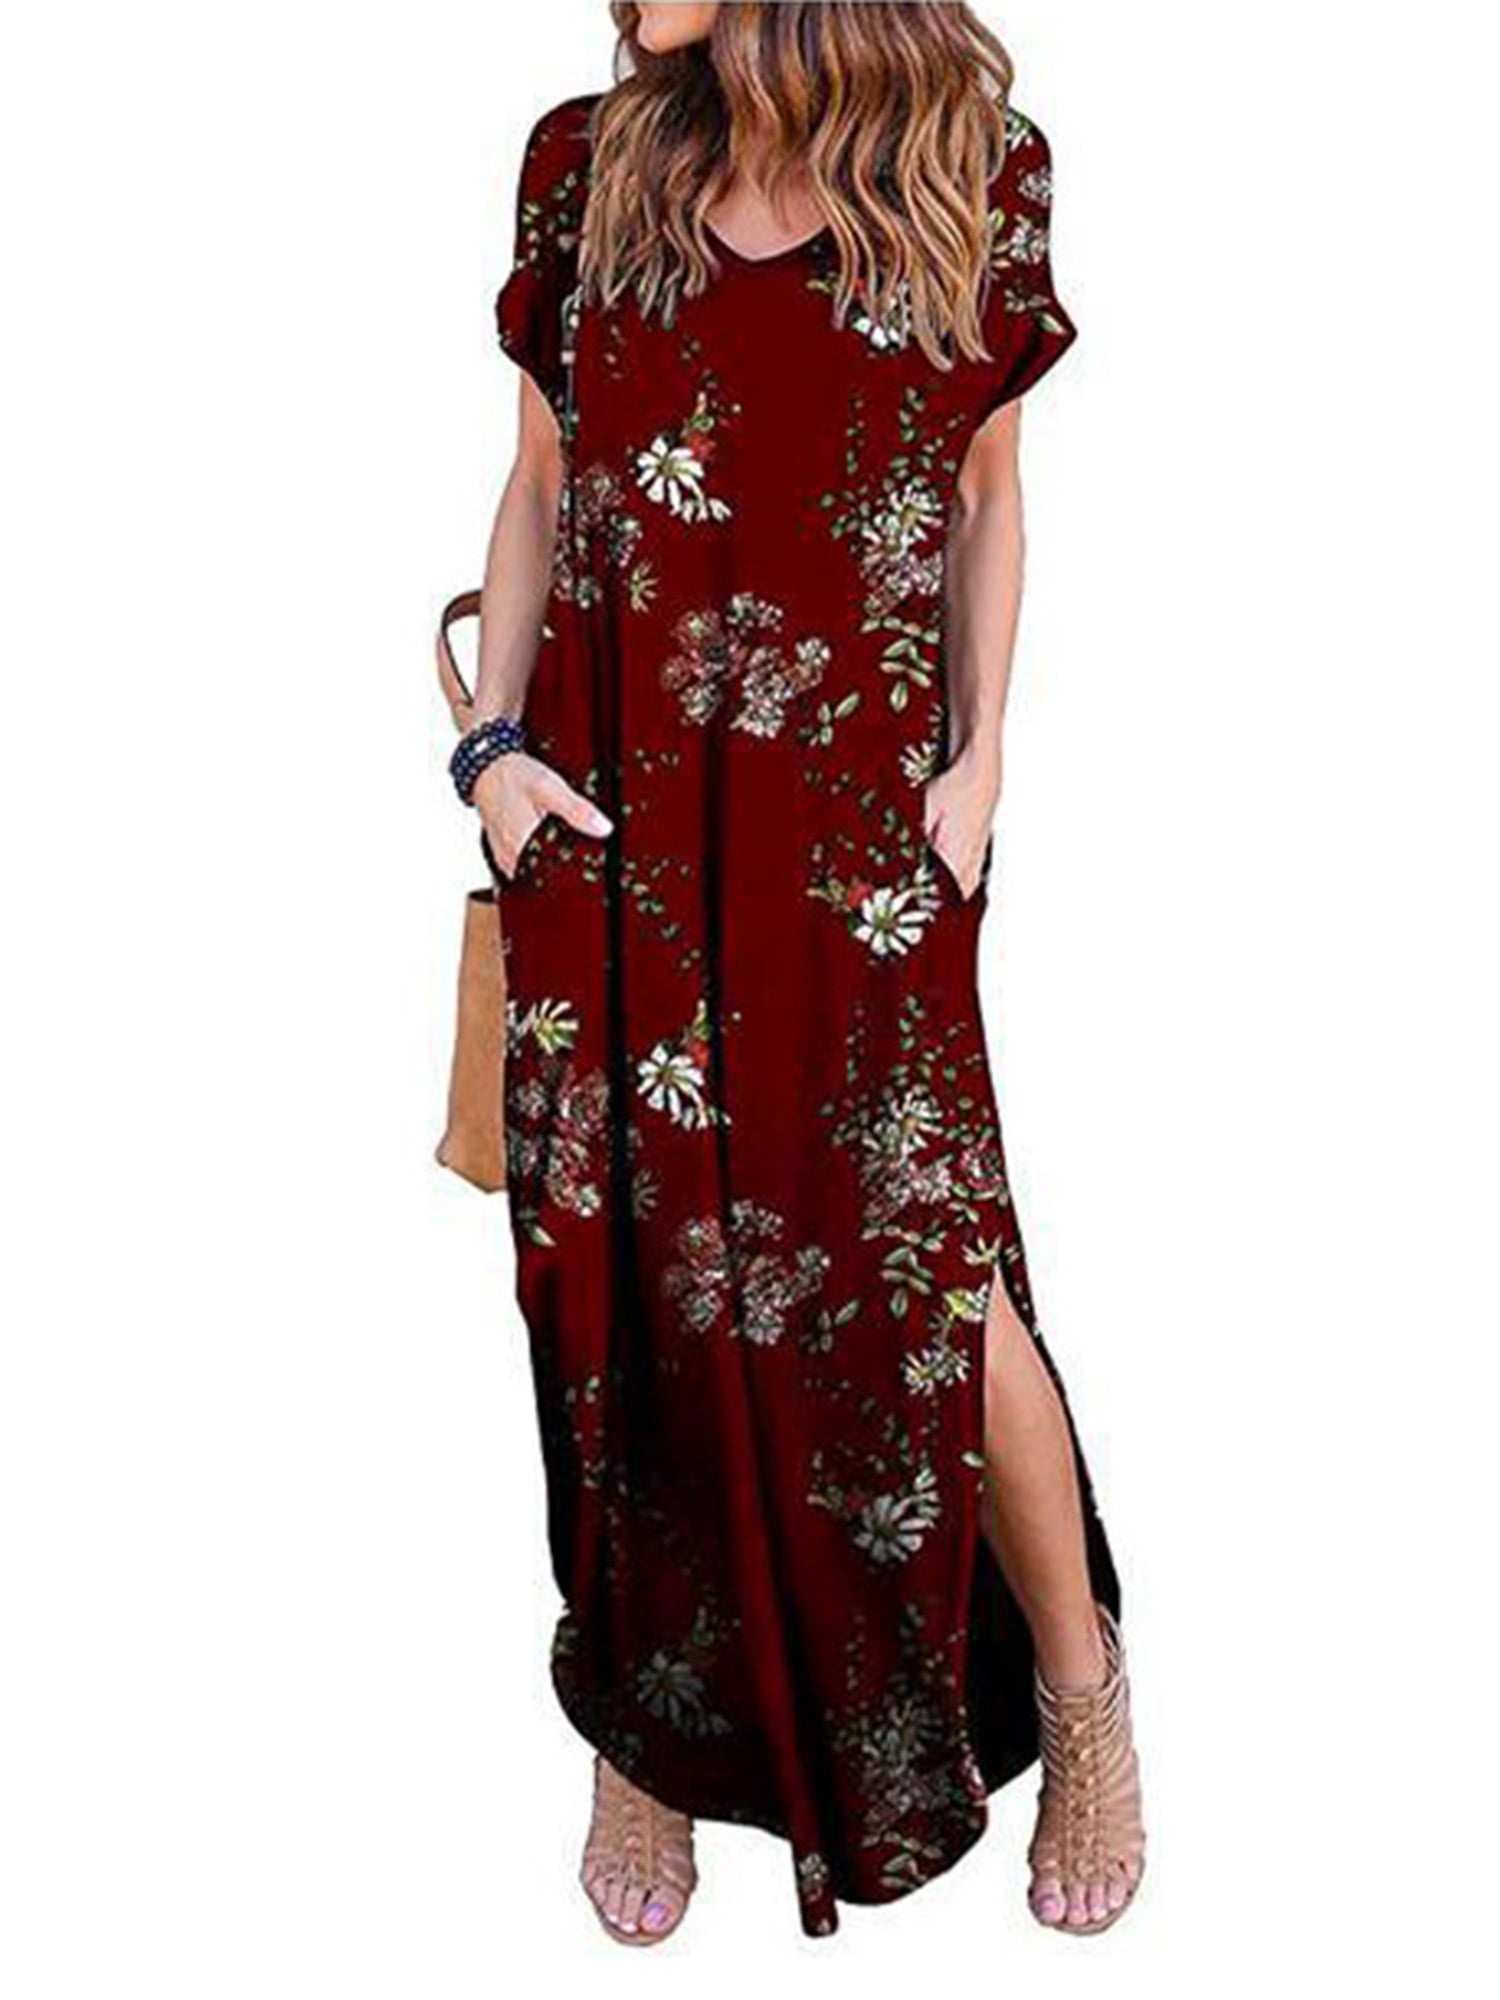 Travel Maternity Holiday GRECERELLE Womens Maxi Dress Ladies' Summer Casual Short Sleeve Long Dresses with Pocket for Daily